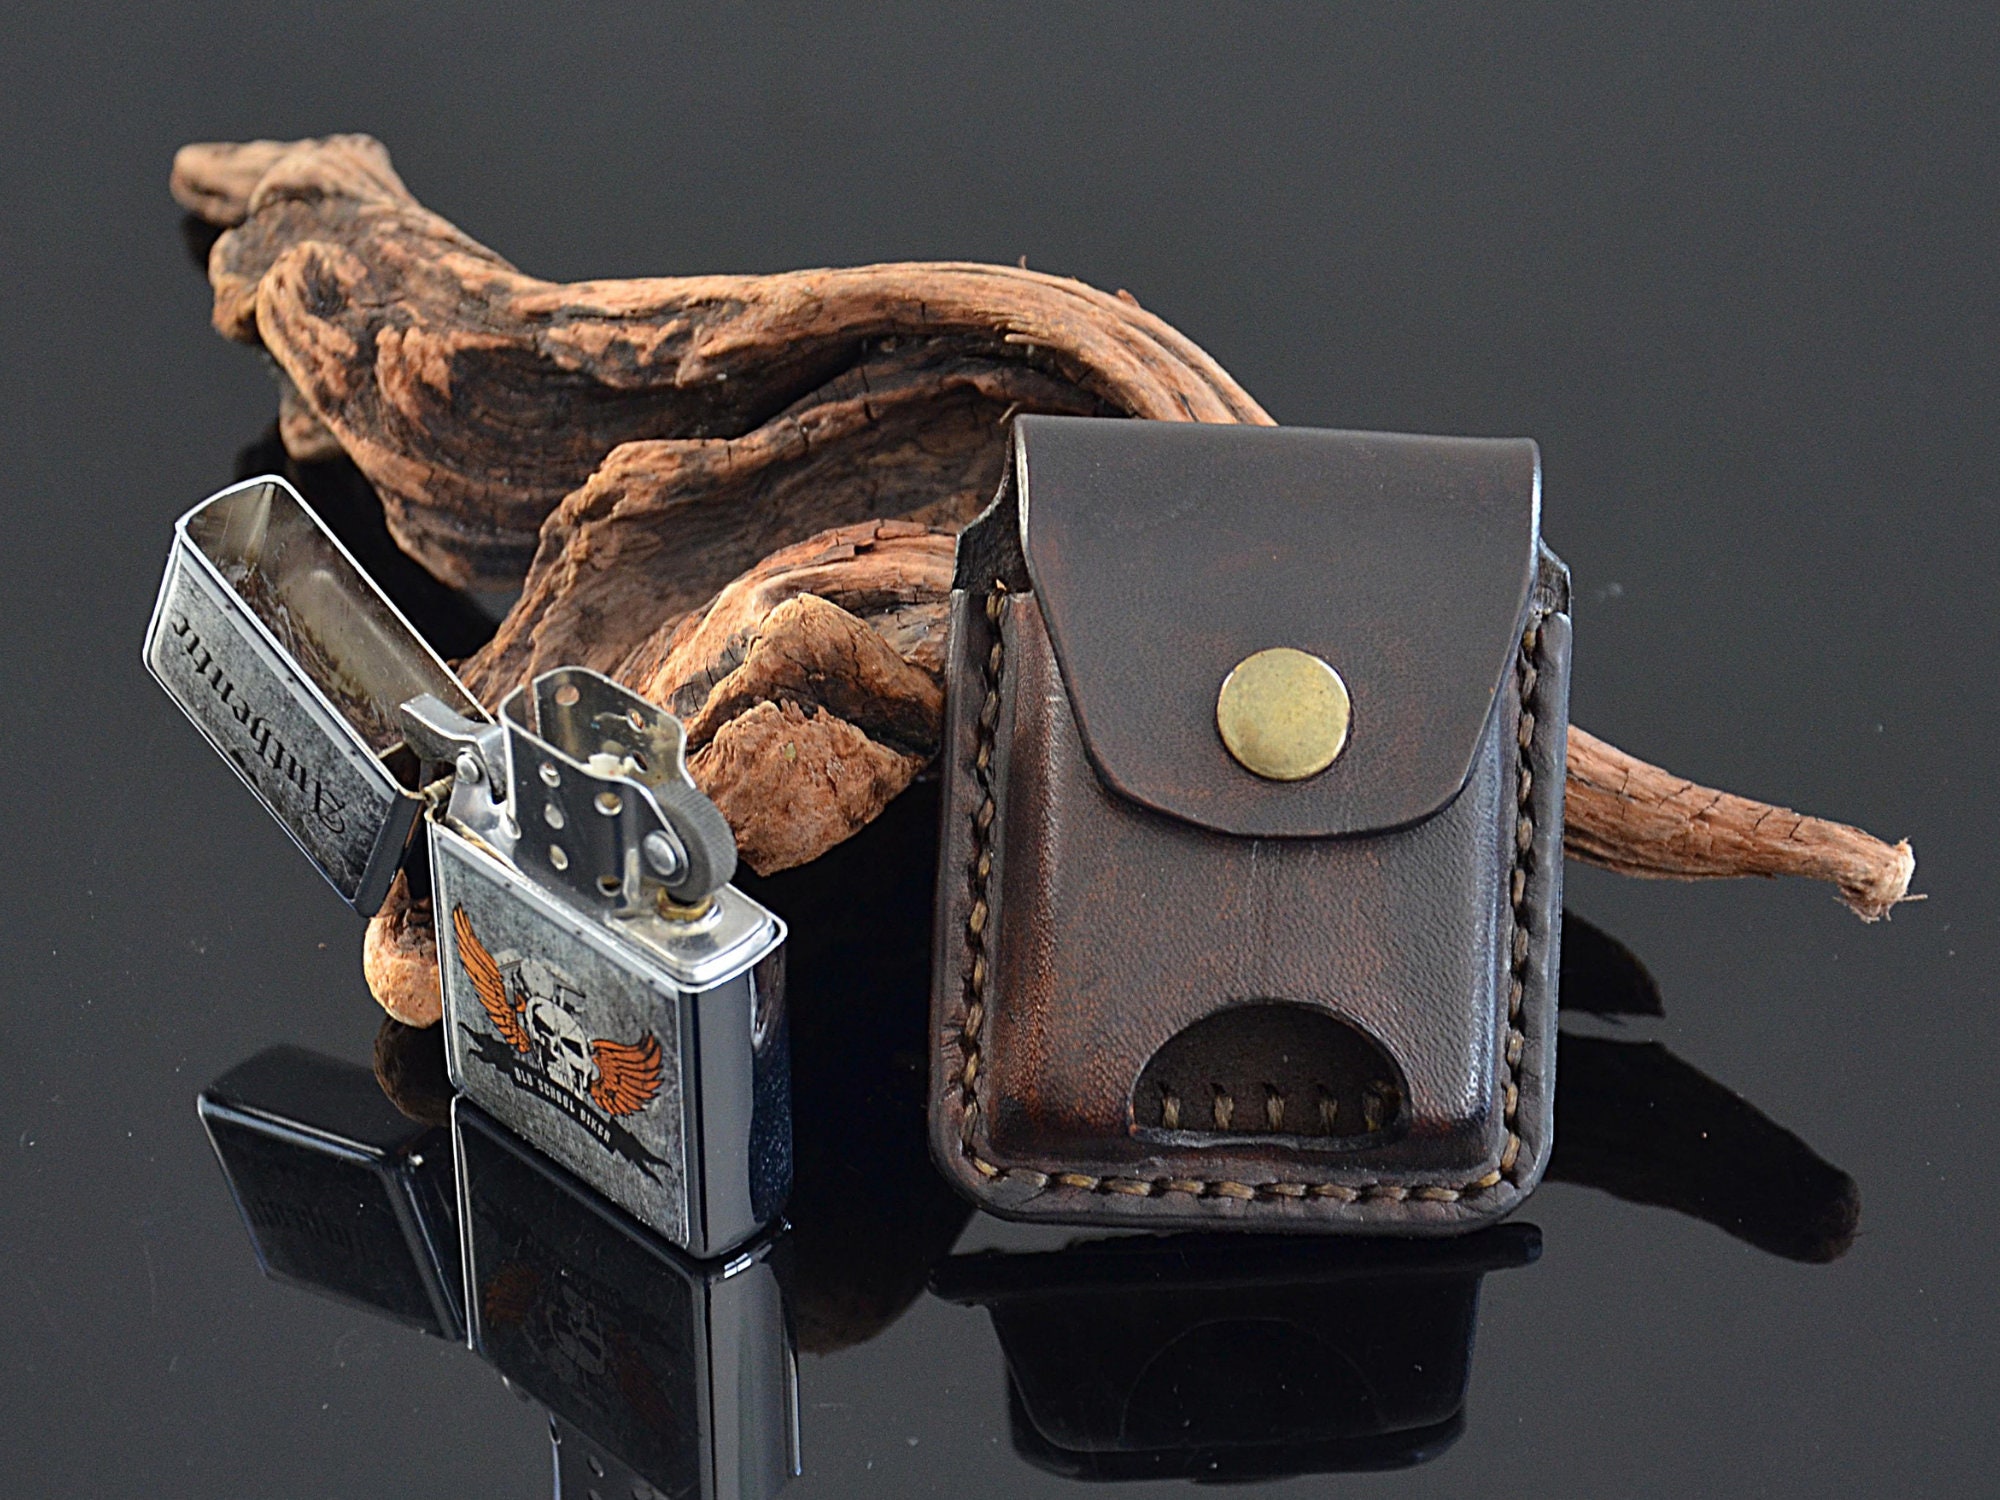 Real Leather Lighter Case Pouch for Zippo, Custom made Lighter